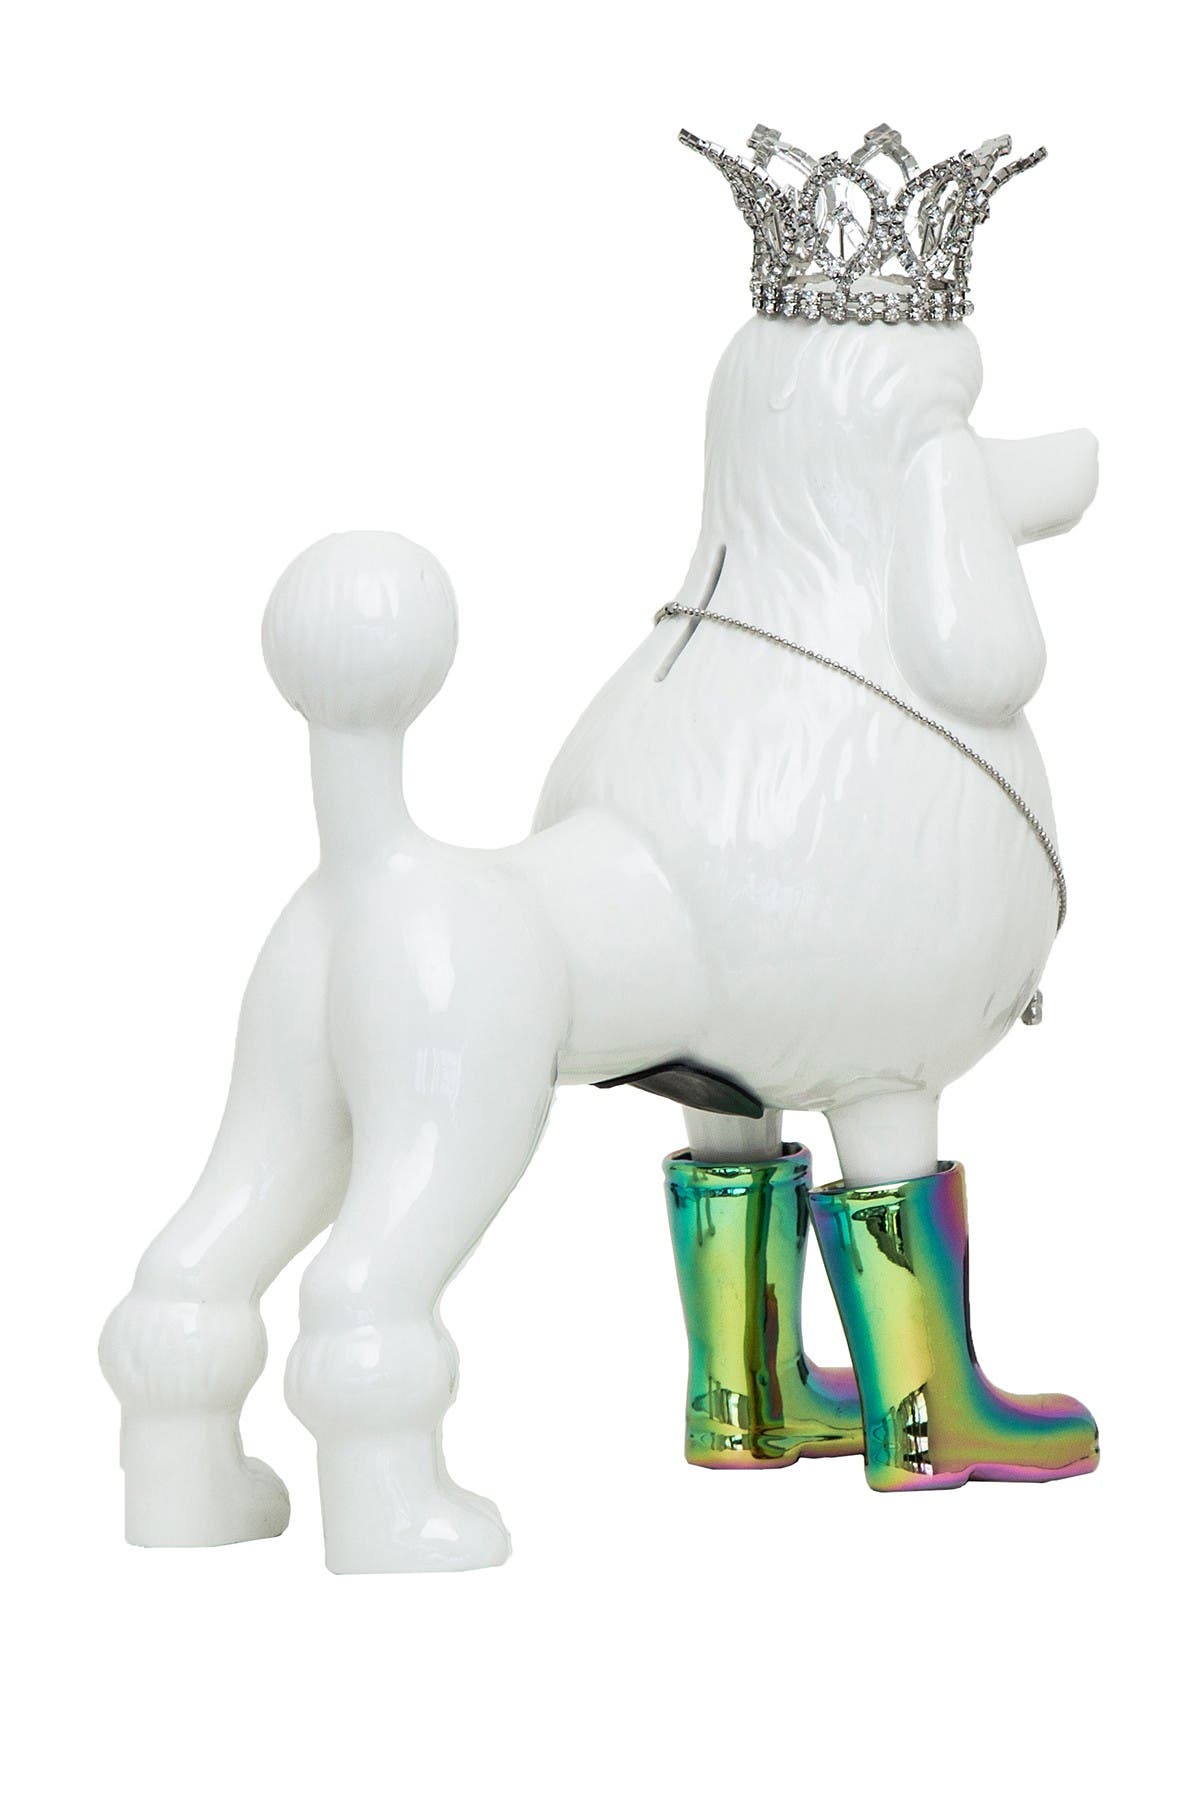 Interior Illusions Iridescent Poodle With Necklace And Crown Bank In Open Miscellaneous